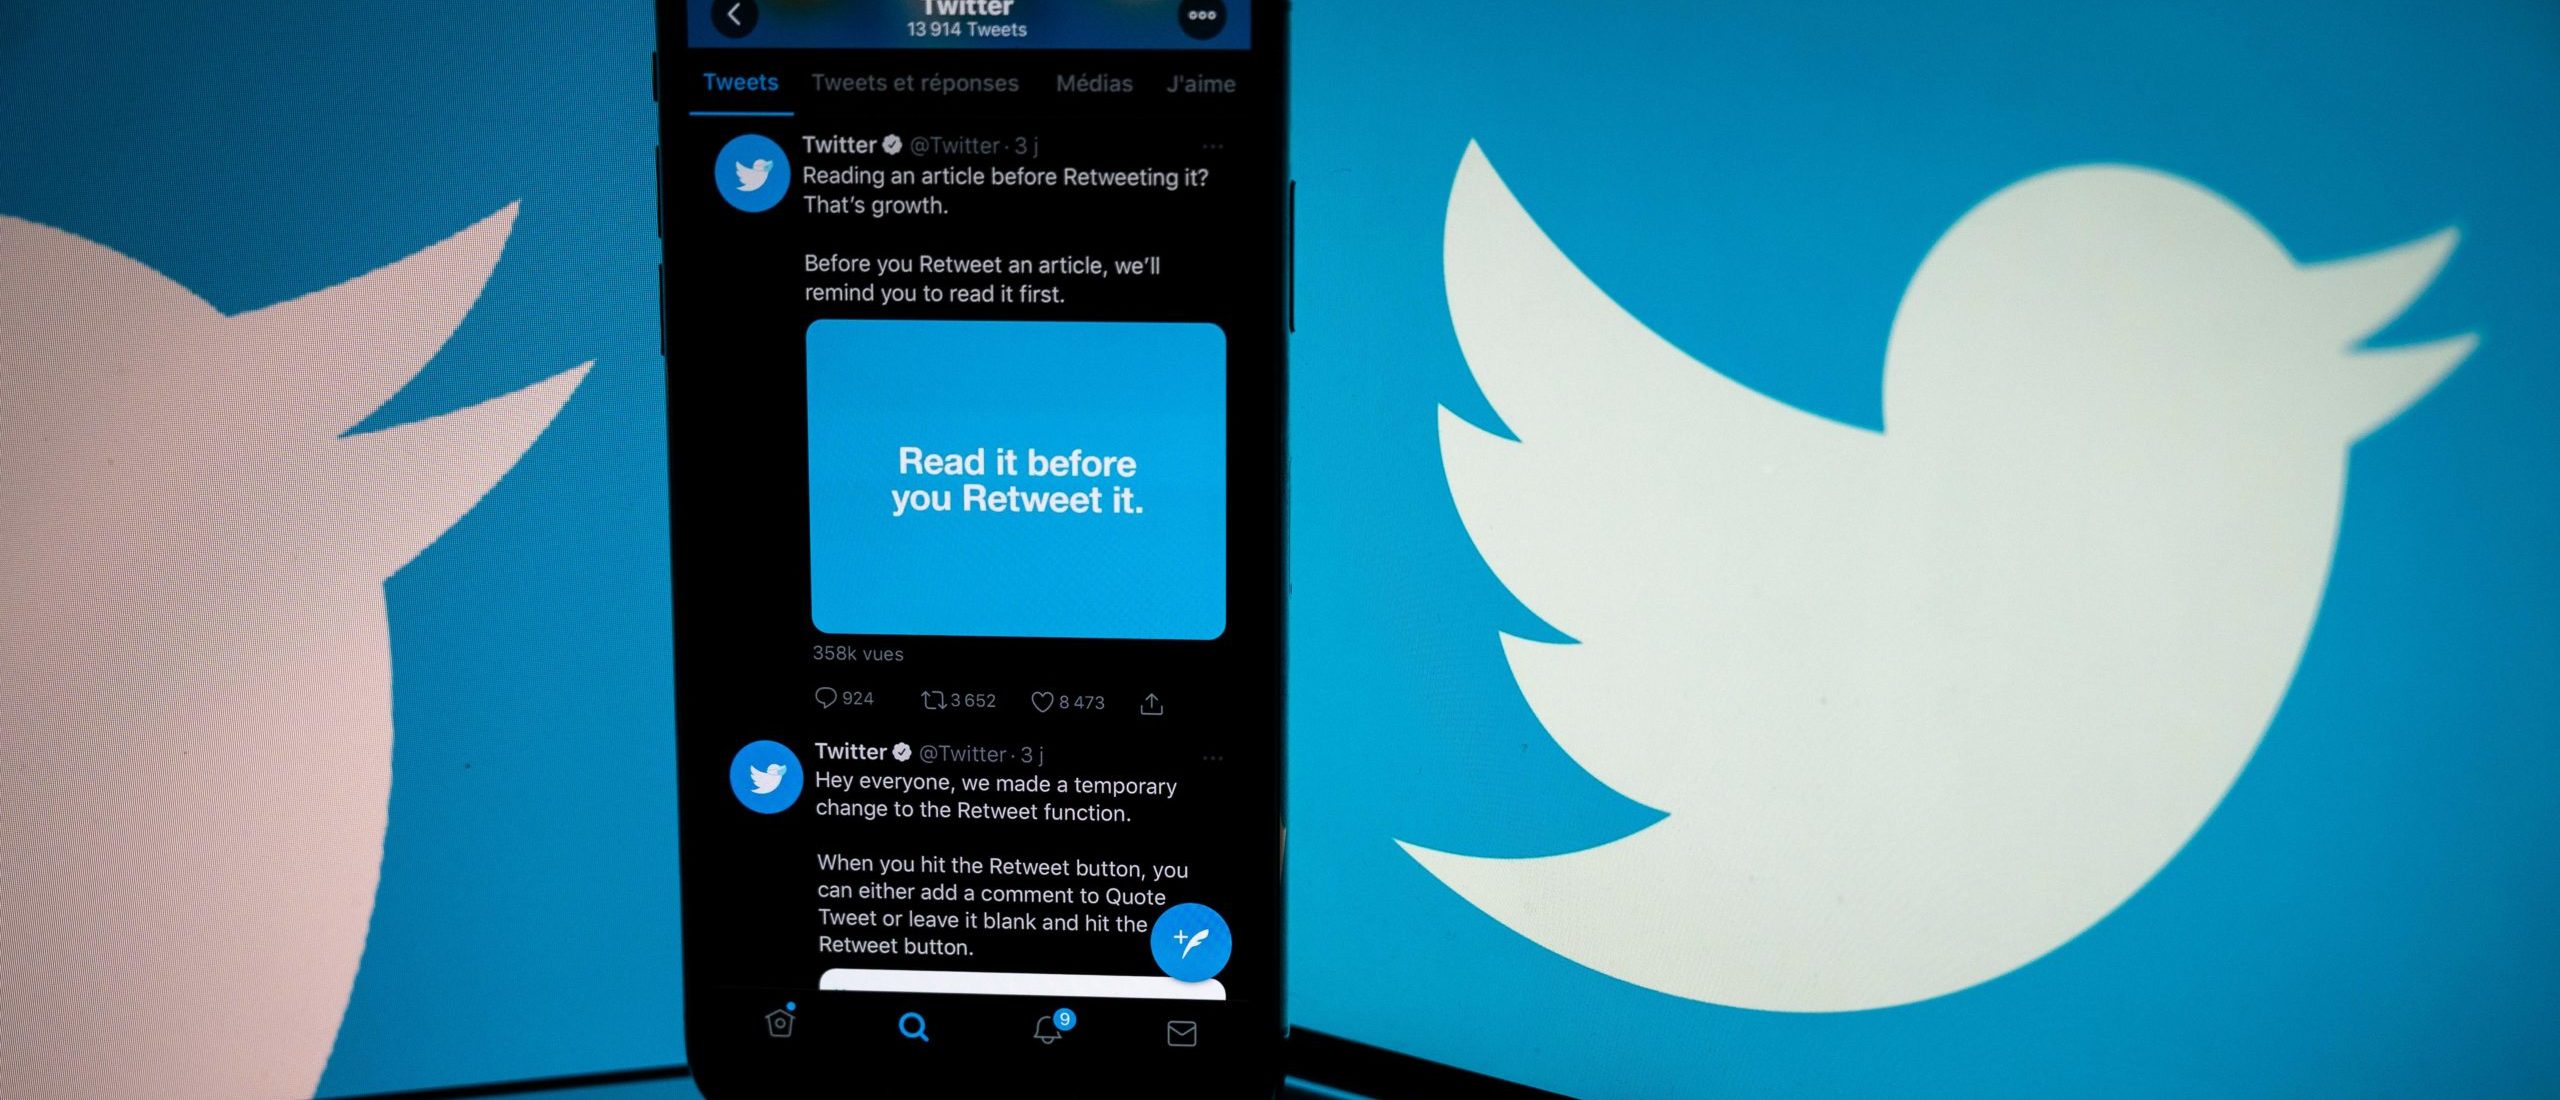 The logo of US social network Twitter displayed on the screen of a smartphone. (Photo by LIONEL BONAVENTURE/AFP via Getty Images)